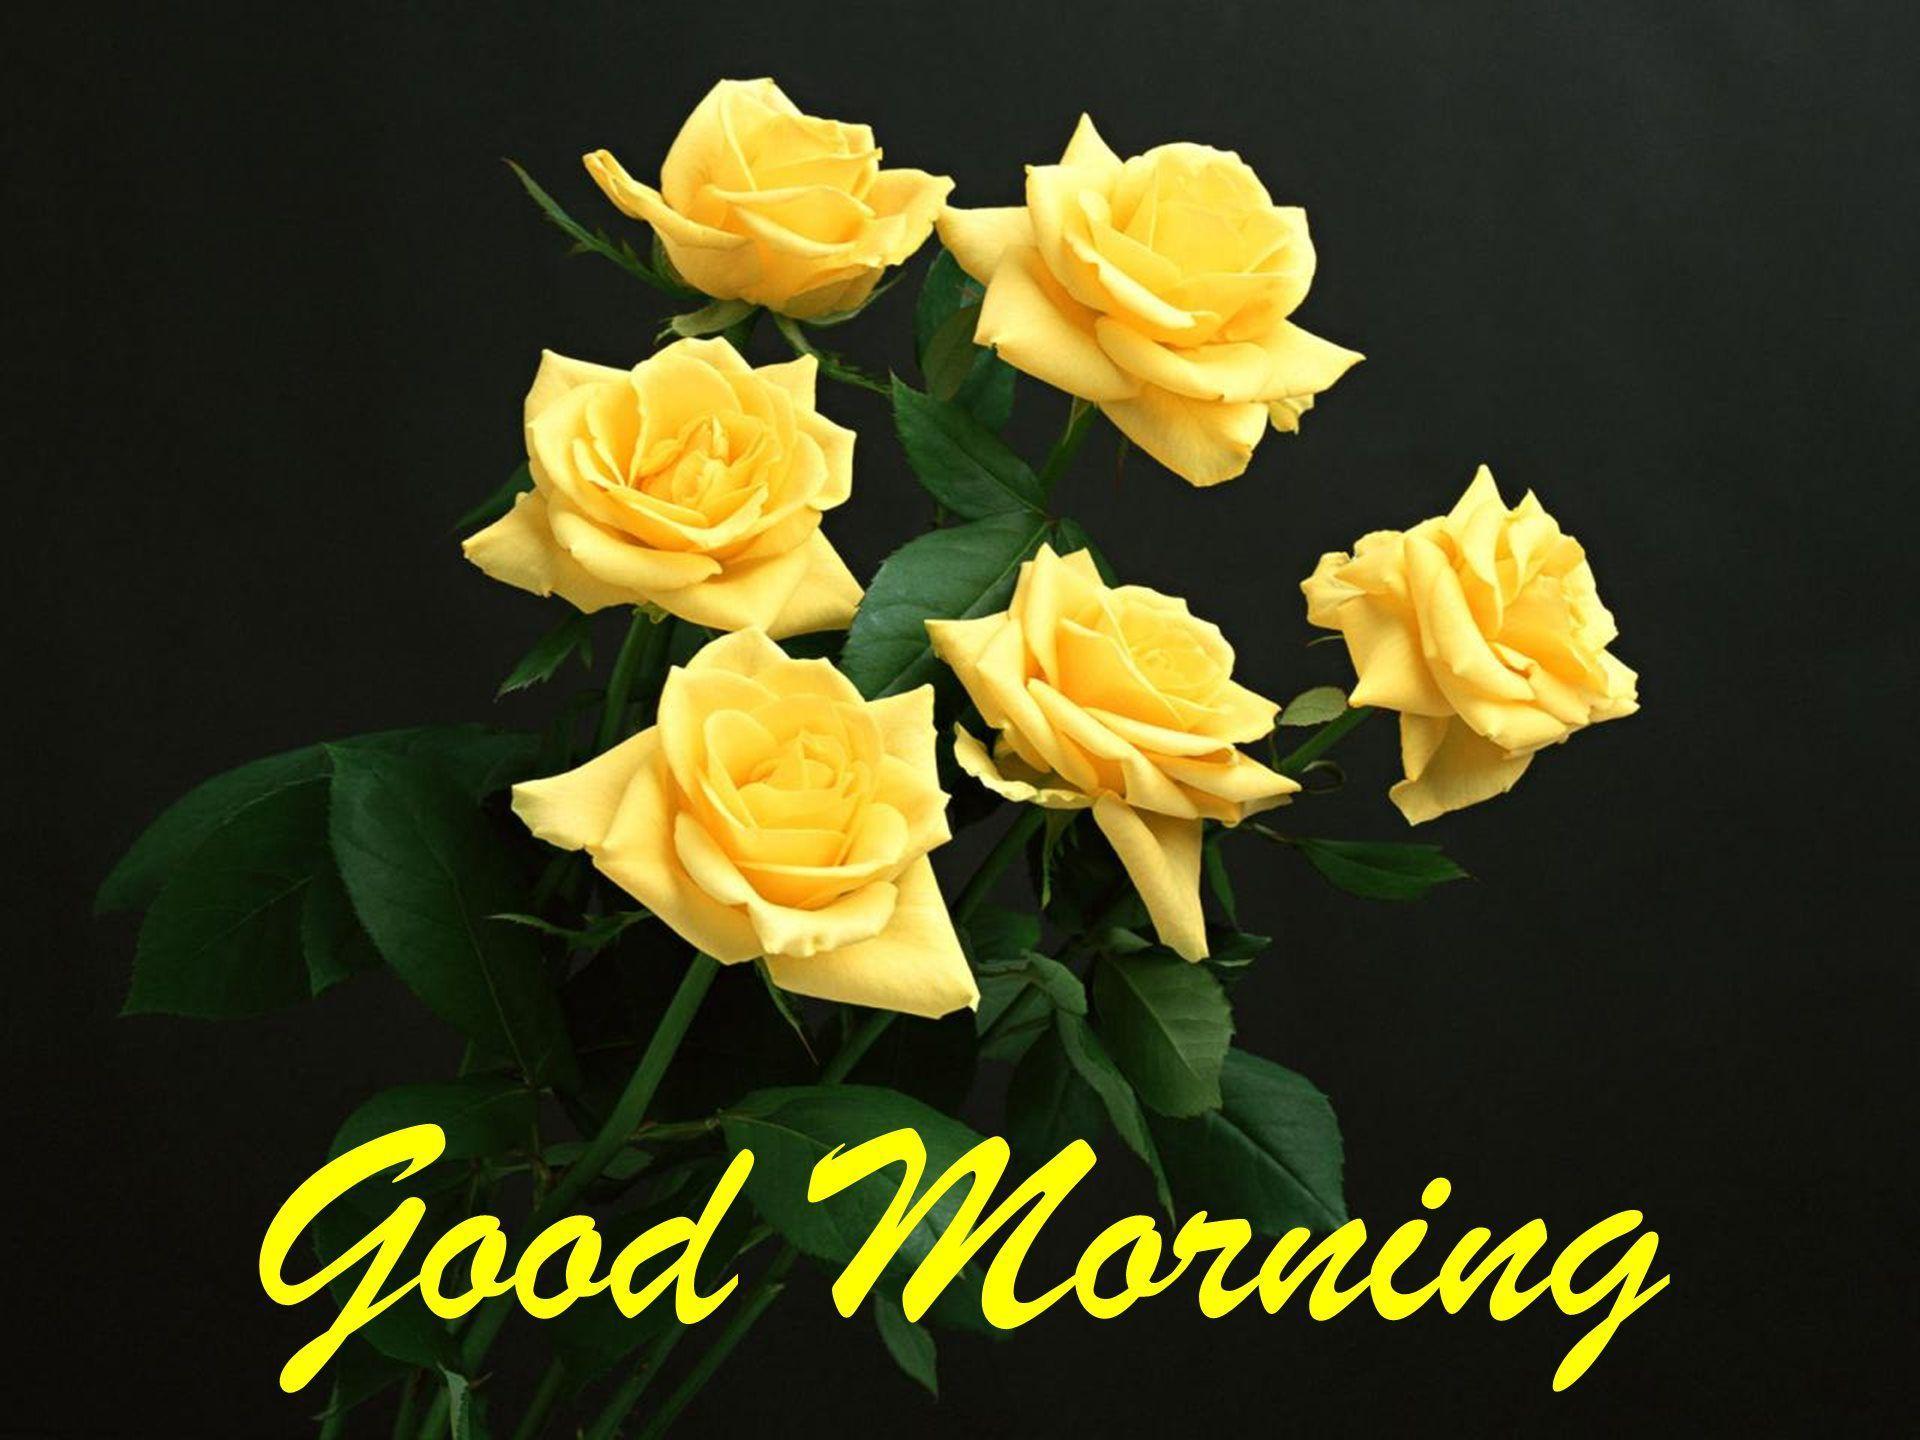 Good Morning Flower Wallpapers Colorful Roses 4k For Android Apk Download